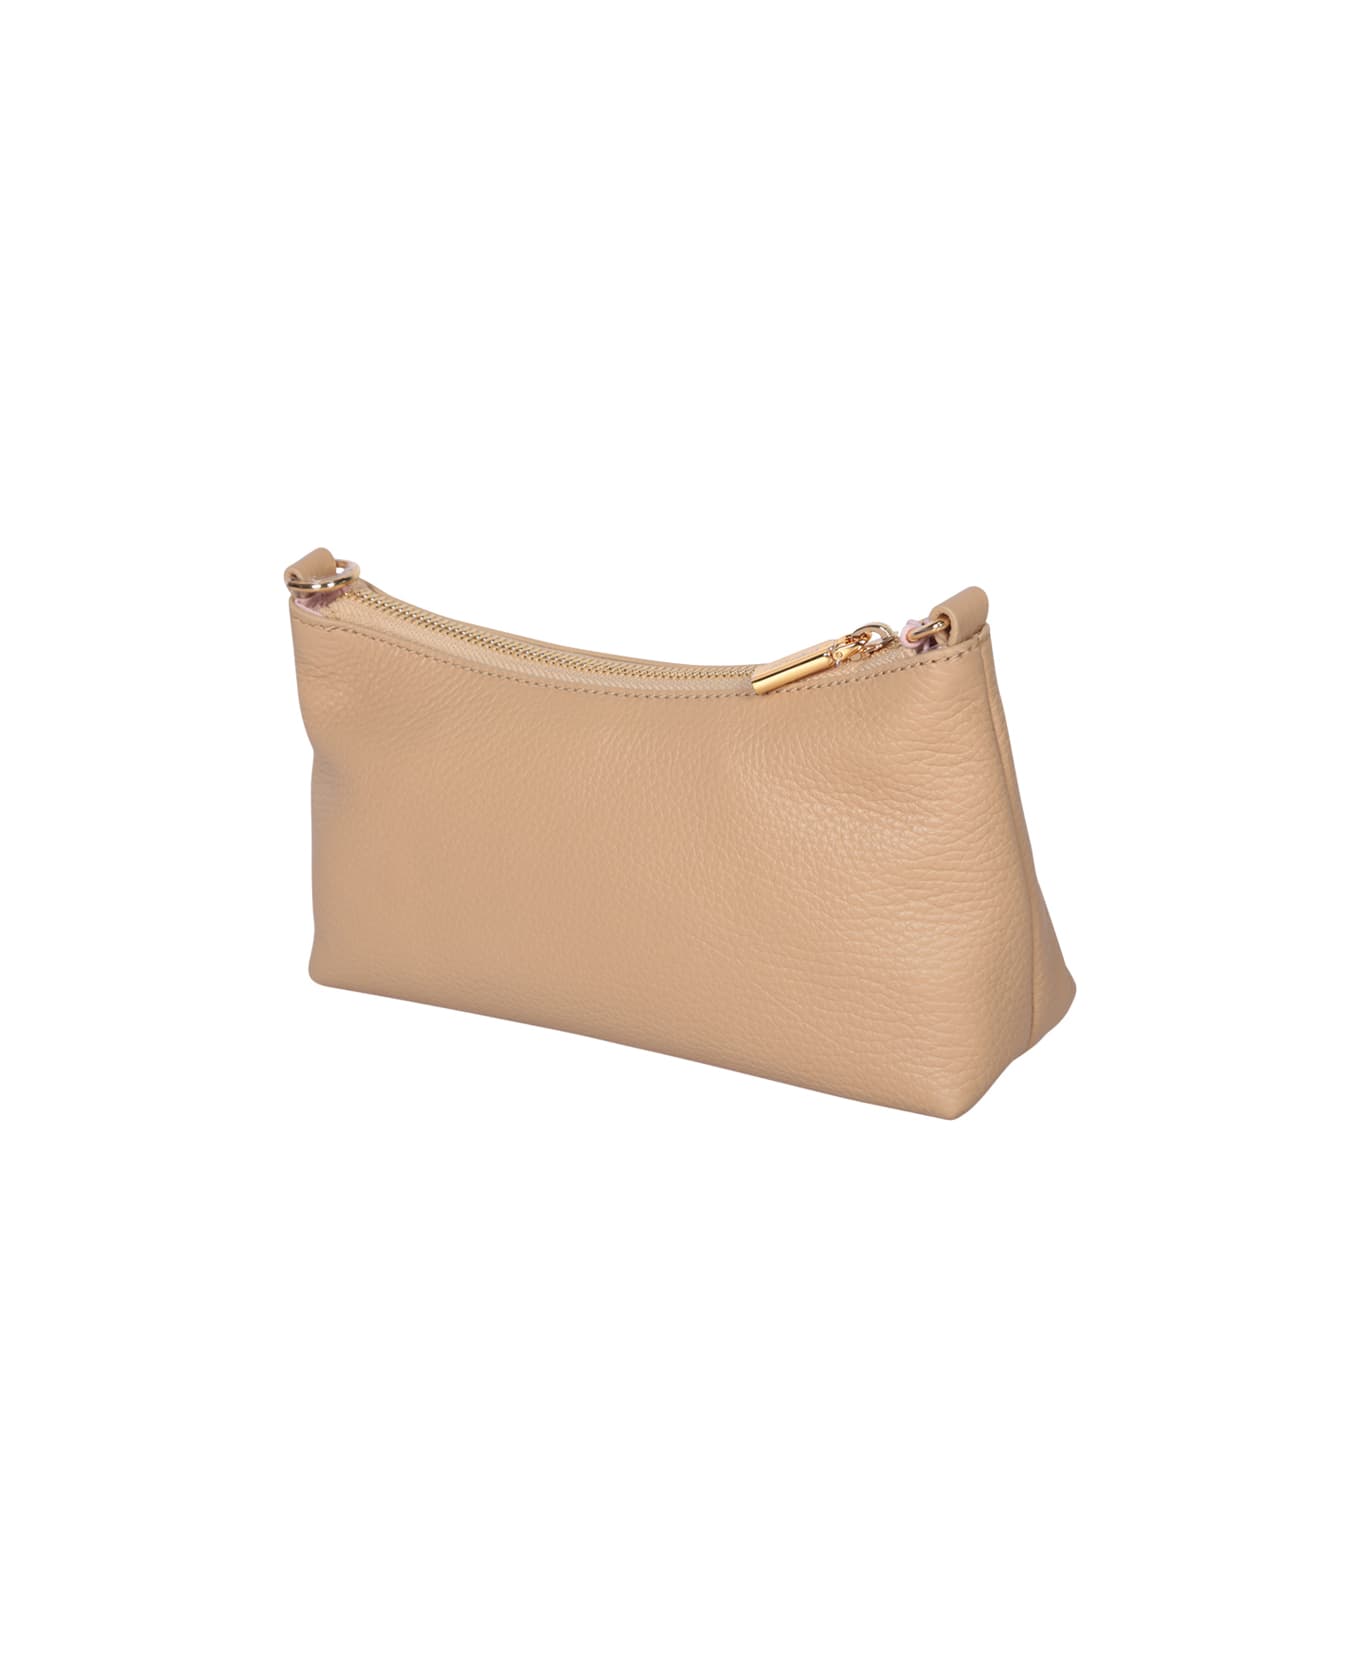 Coccinelle Aura Beige Leather Bag - Beige ショルダーバッグ